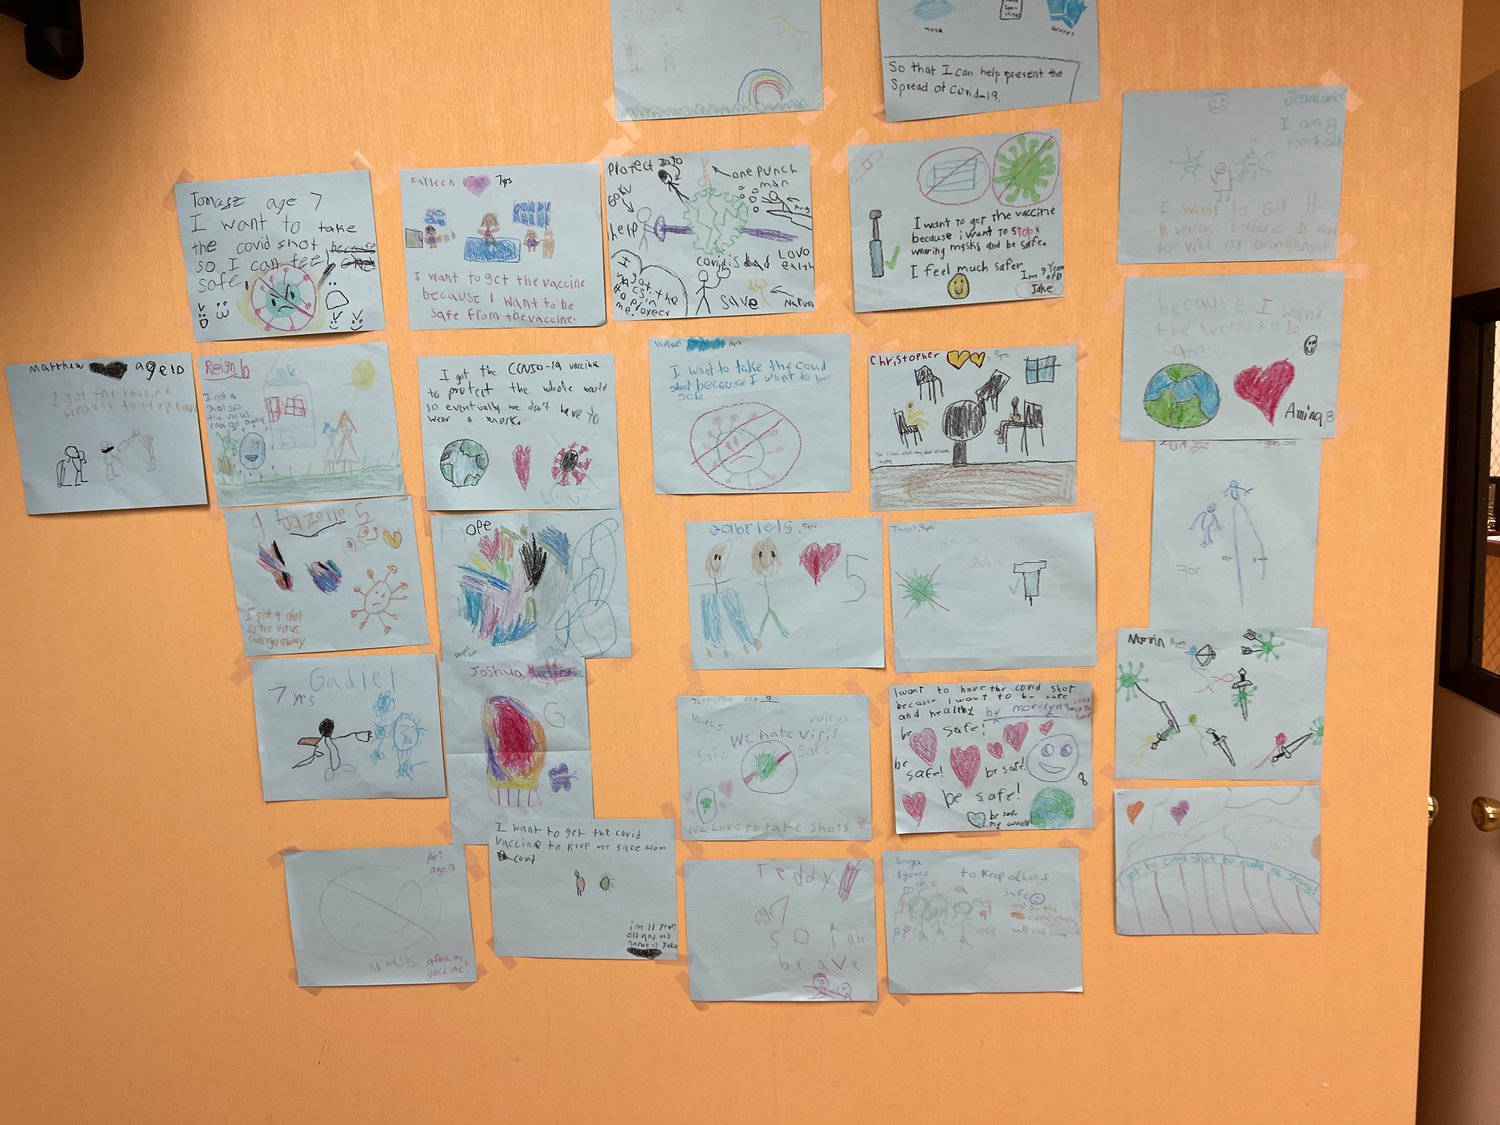 Drawings done by children who have received Covid-19 vaccinations at Dr. Mitchell Weiler’s Cedarhurst office.